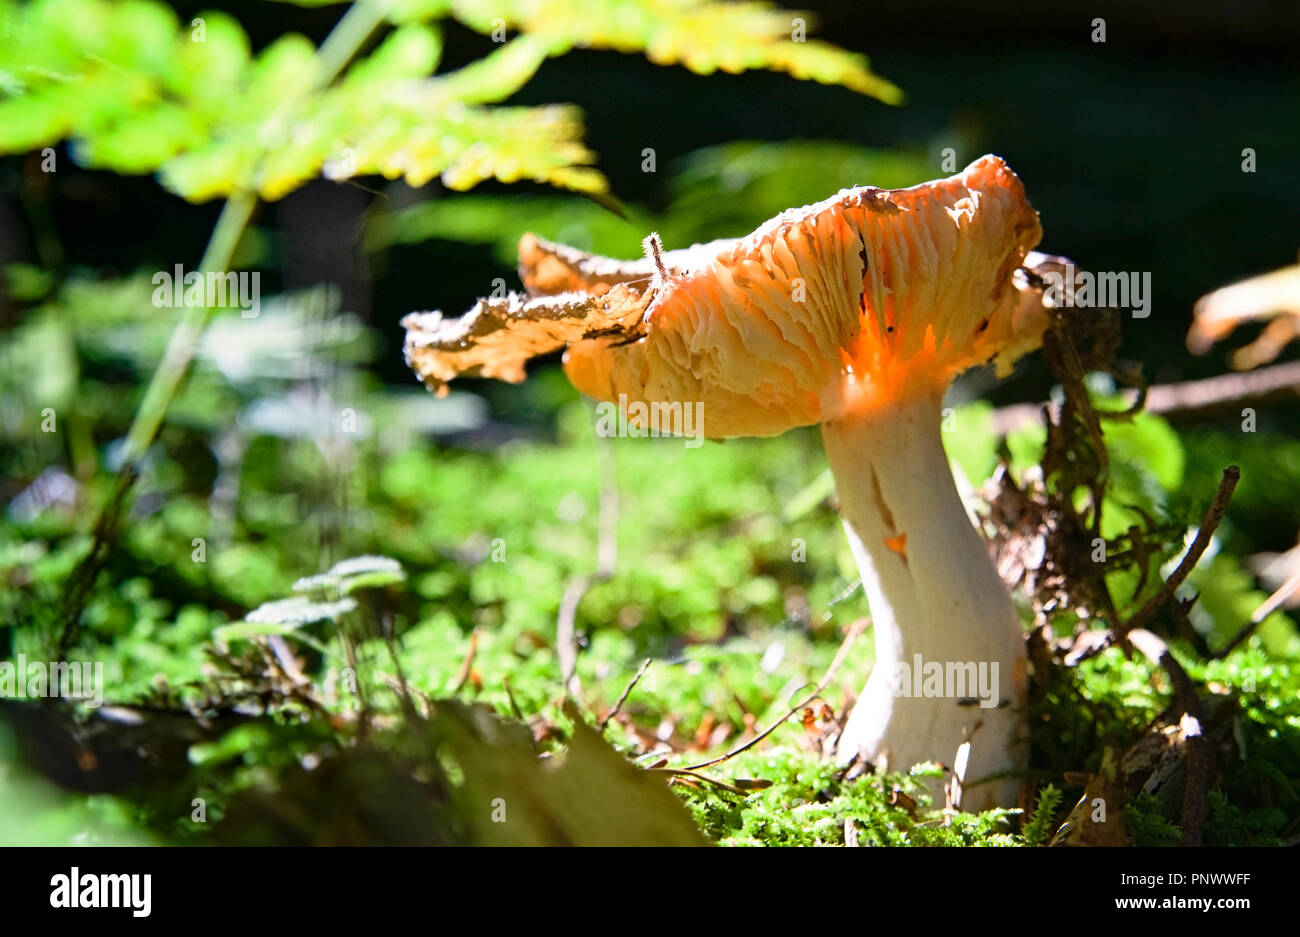 mushroom and Moss in the forest Stock Photo